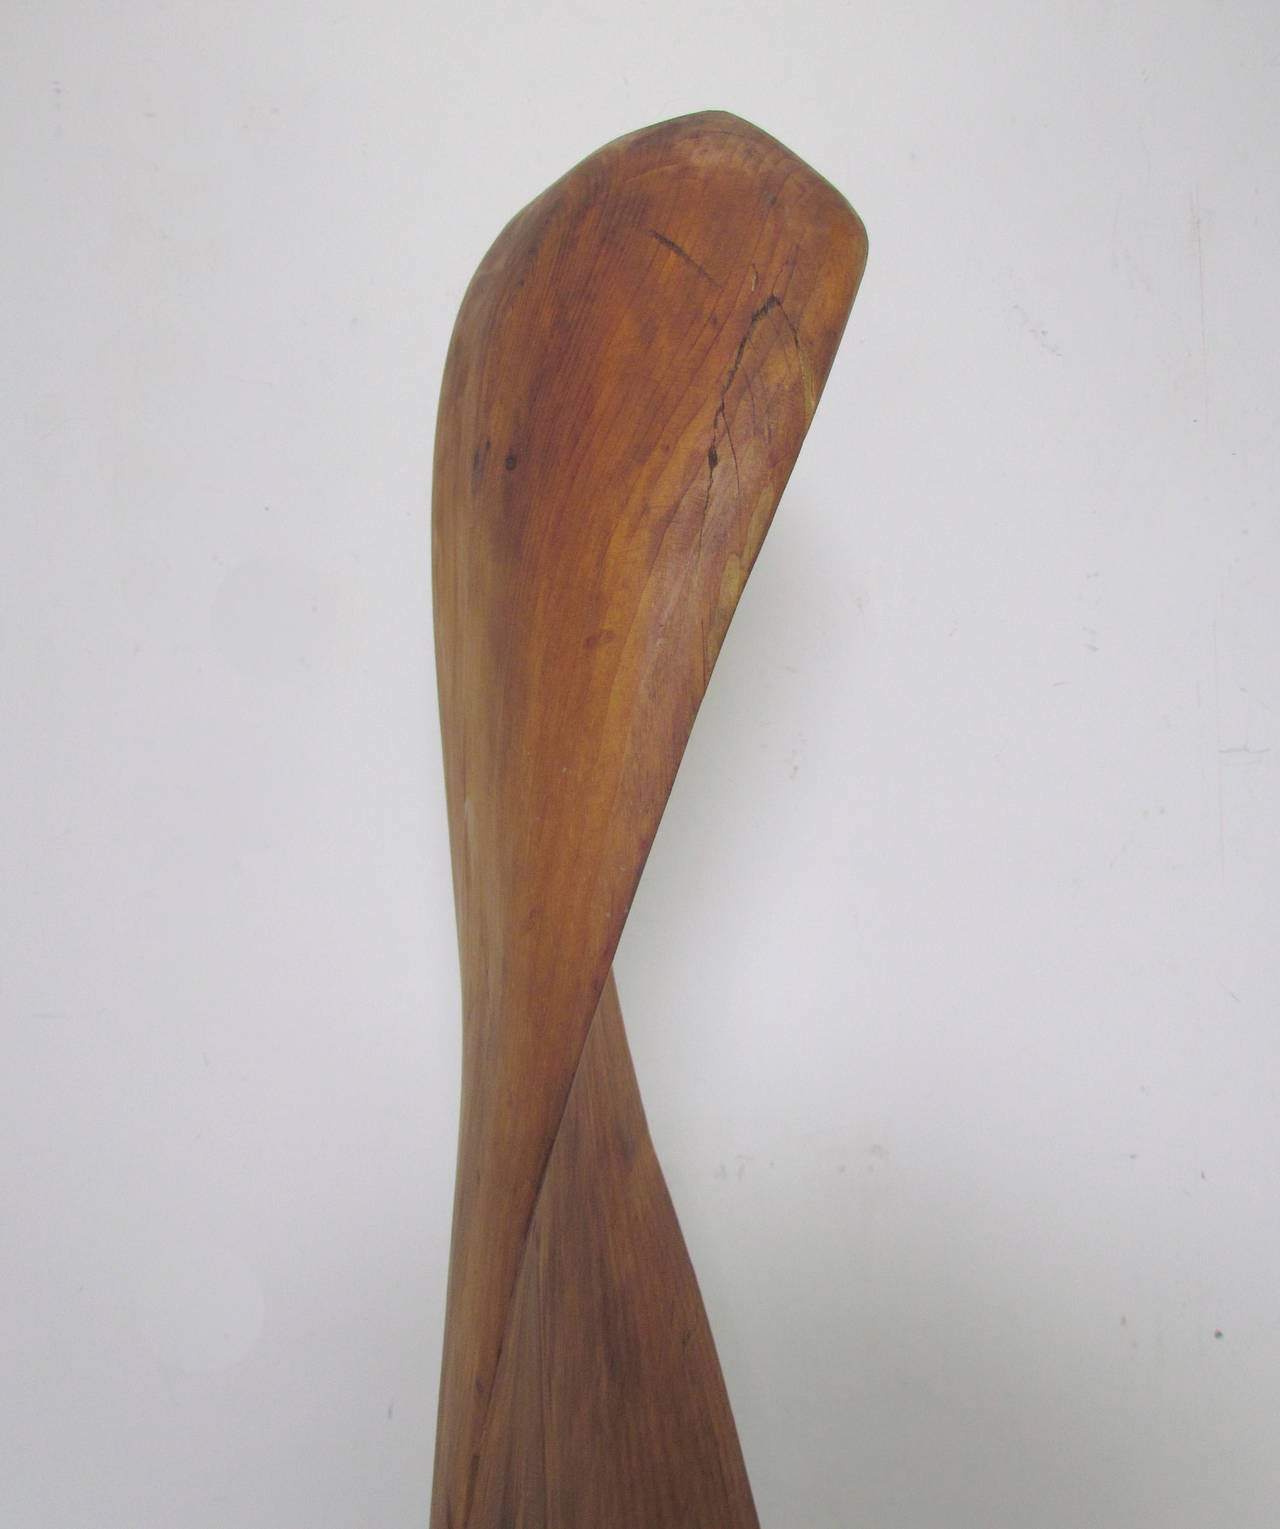 Abstract hand-carved wood floor sculpture, by F. Neal Eddy, signed on bottom and dated 1979. A noted physicist and wood sculptor, Eddy is particularly known for his studies of nudes.